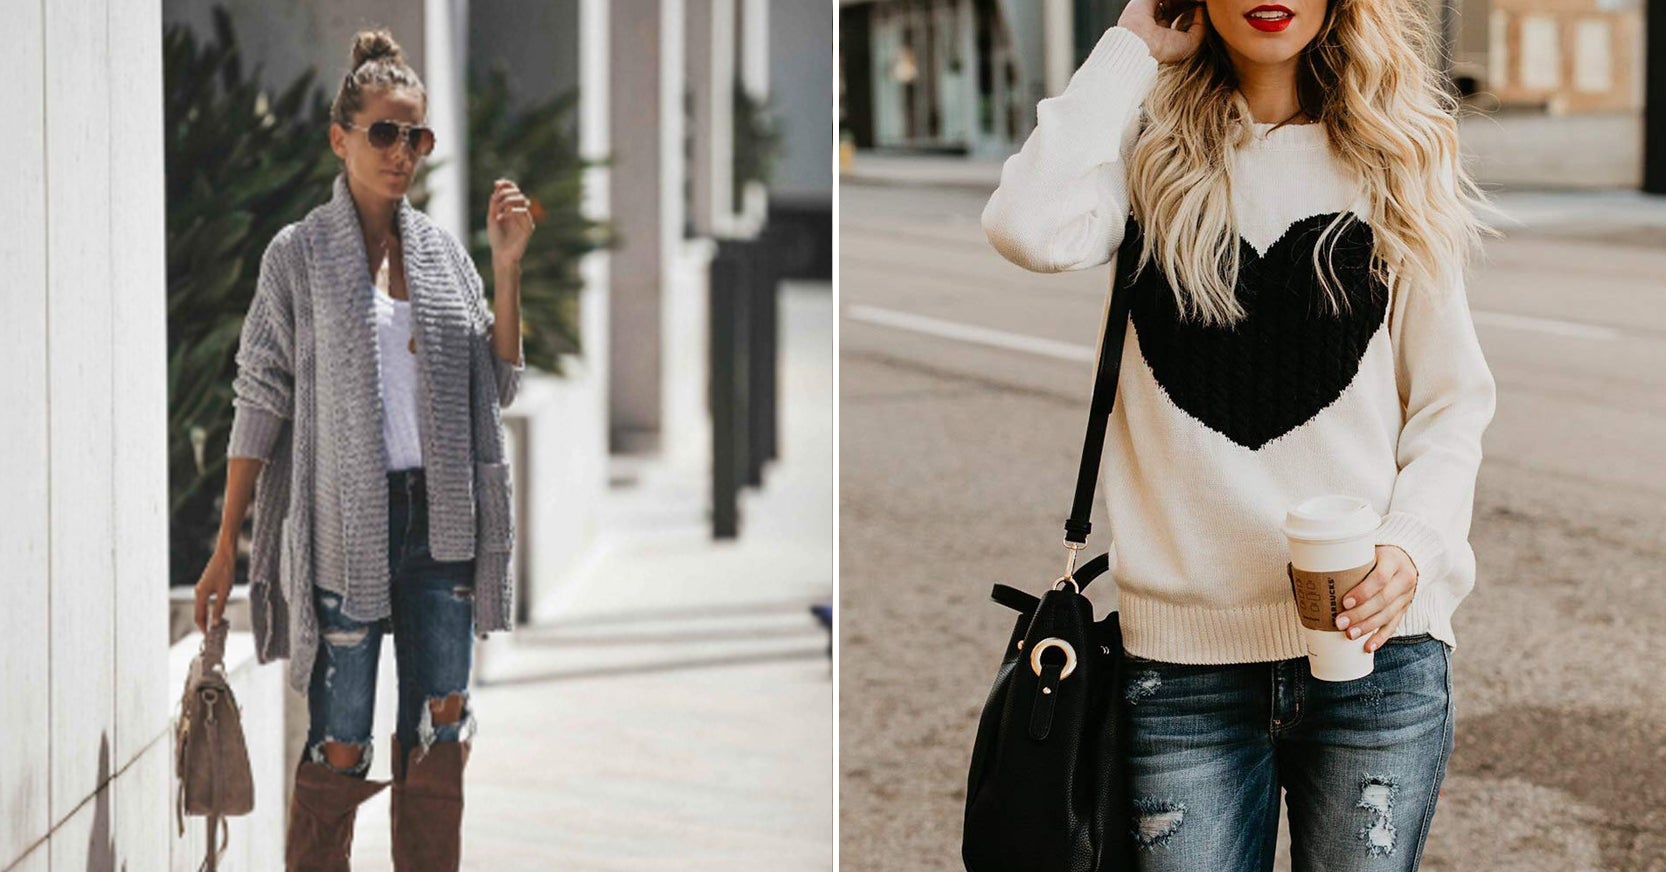 30 Sweaters And Sweatshirts Under $30 That'll Keep You Warm This Winter